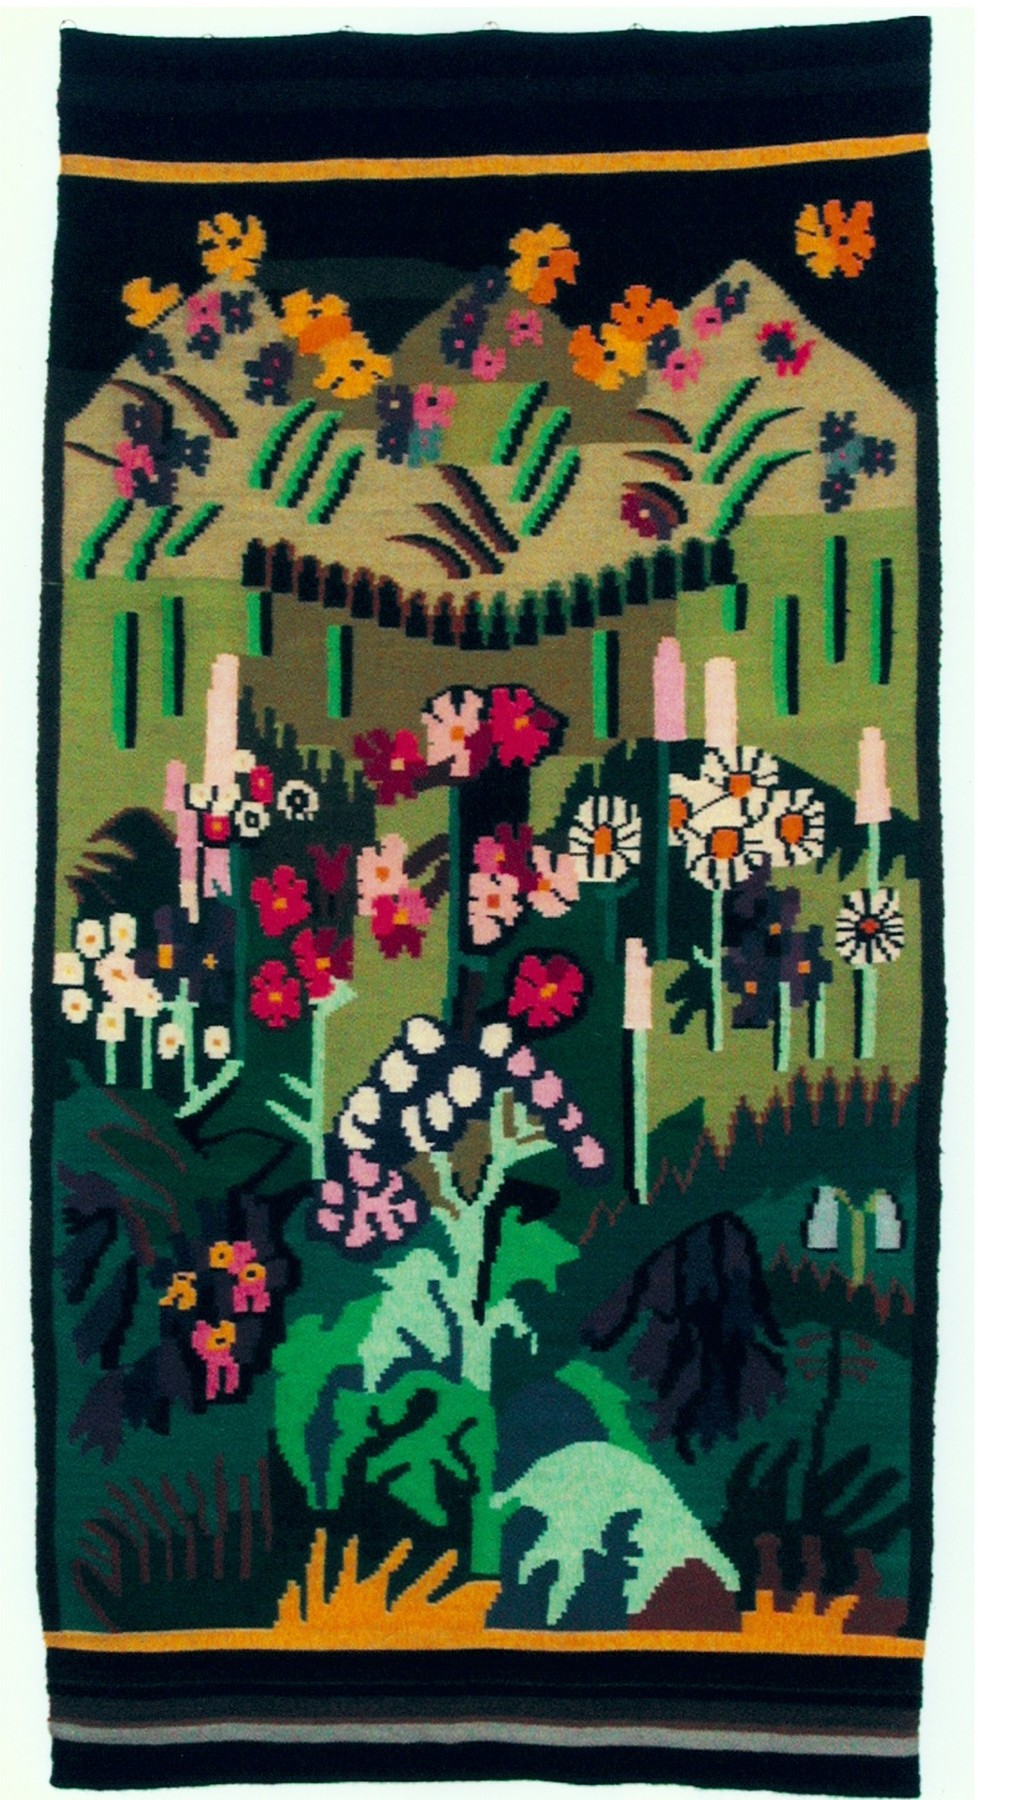  Ernst Ludwig Kirchner and Lise Gujer, Blumenteppich, 1938, Tapestry